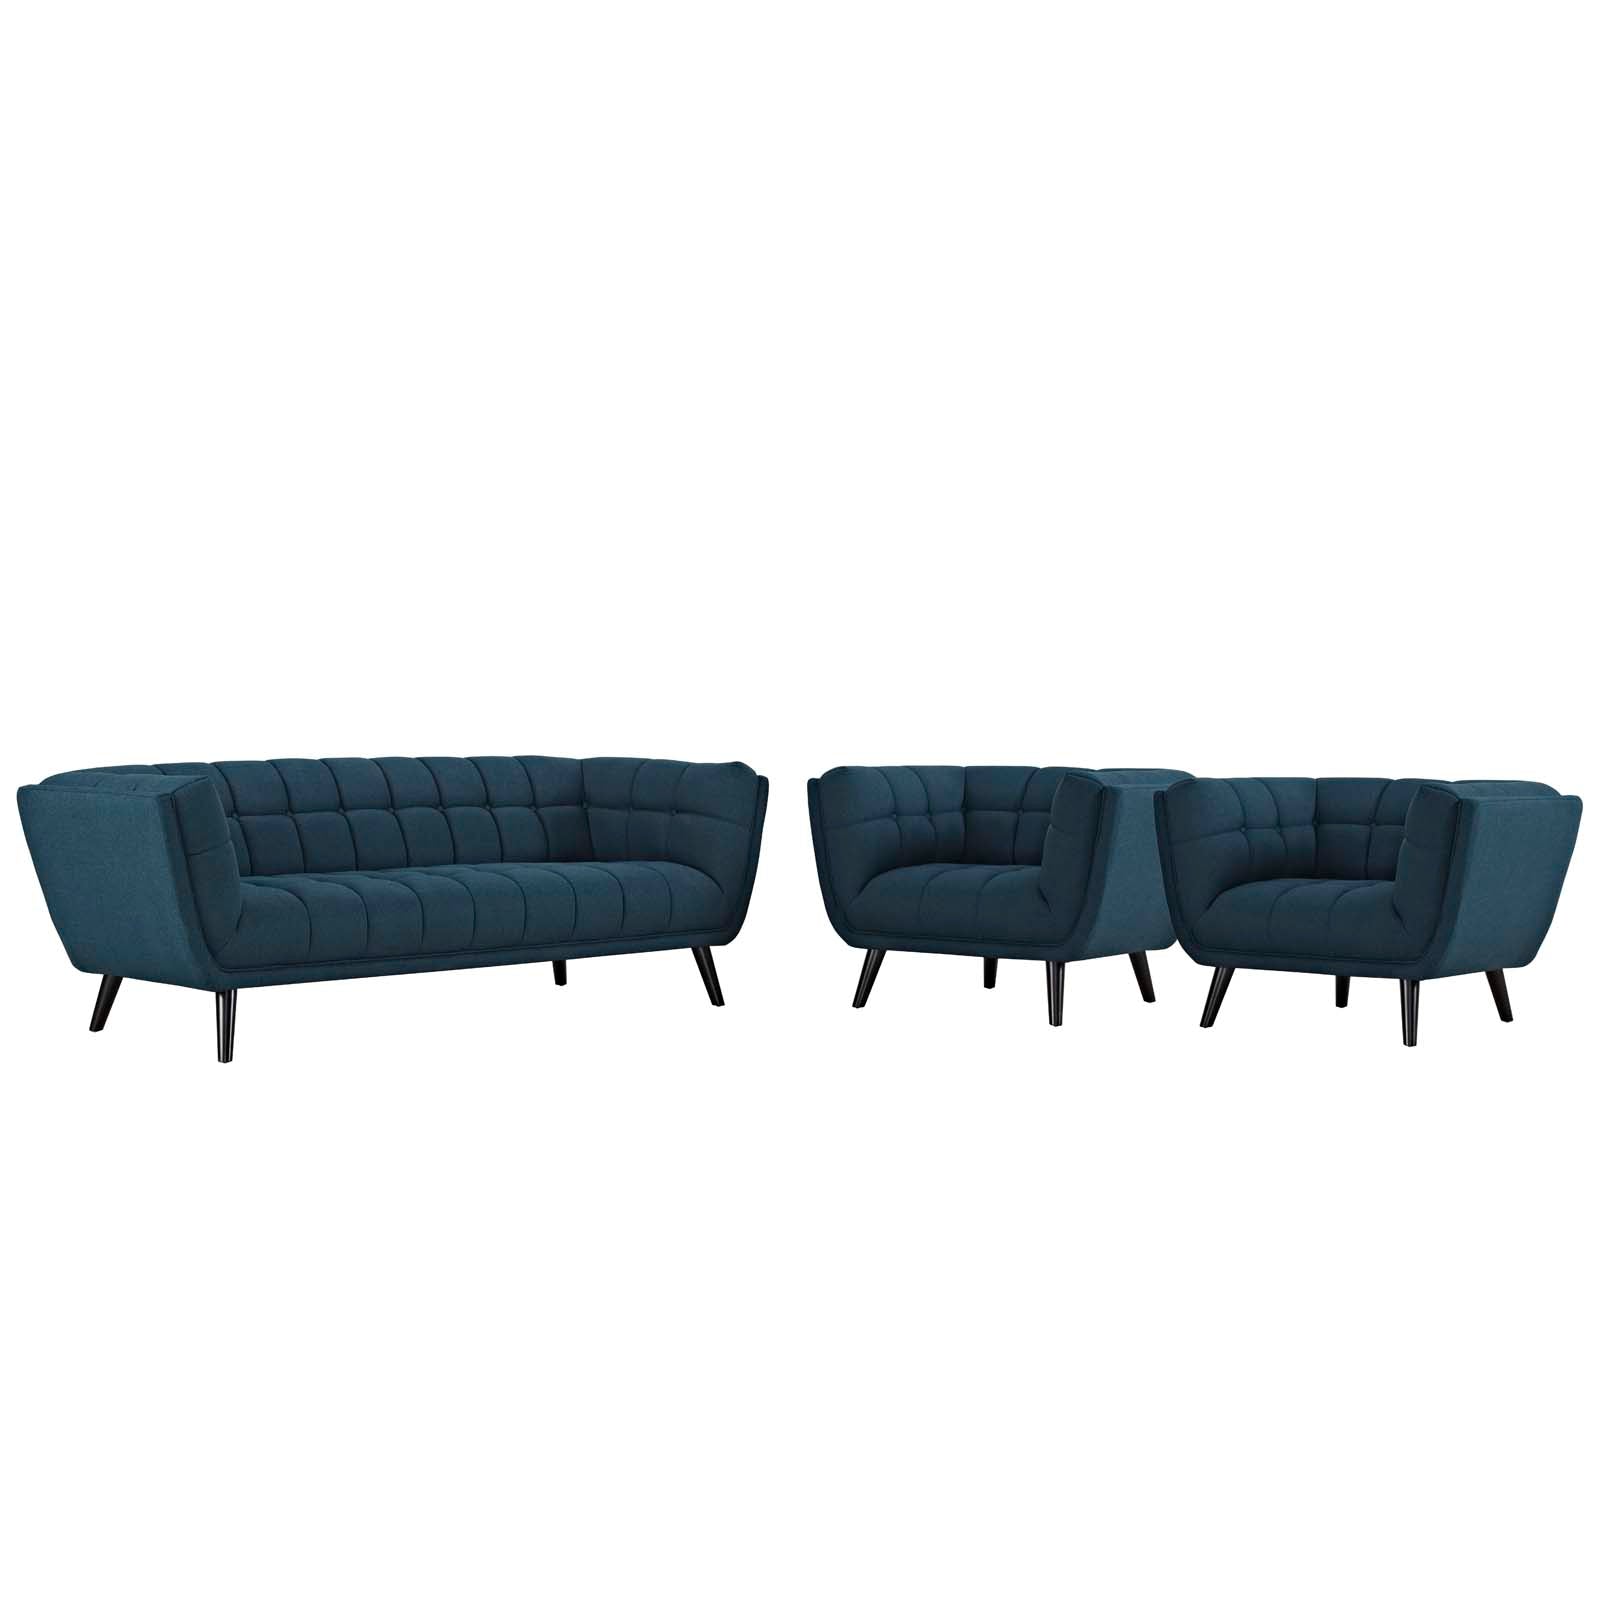 Bestow 3 Piece Upholstered Fabric Sofa and Armchair Set - East Shore Modern Home Furnishings